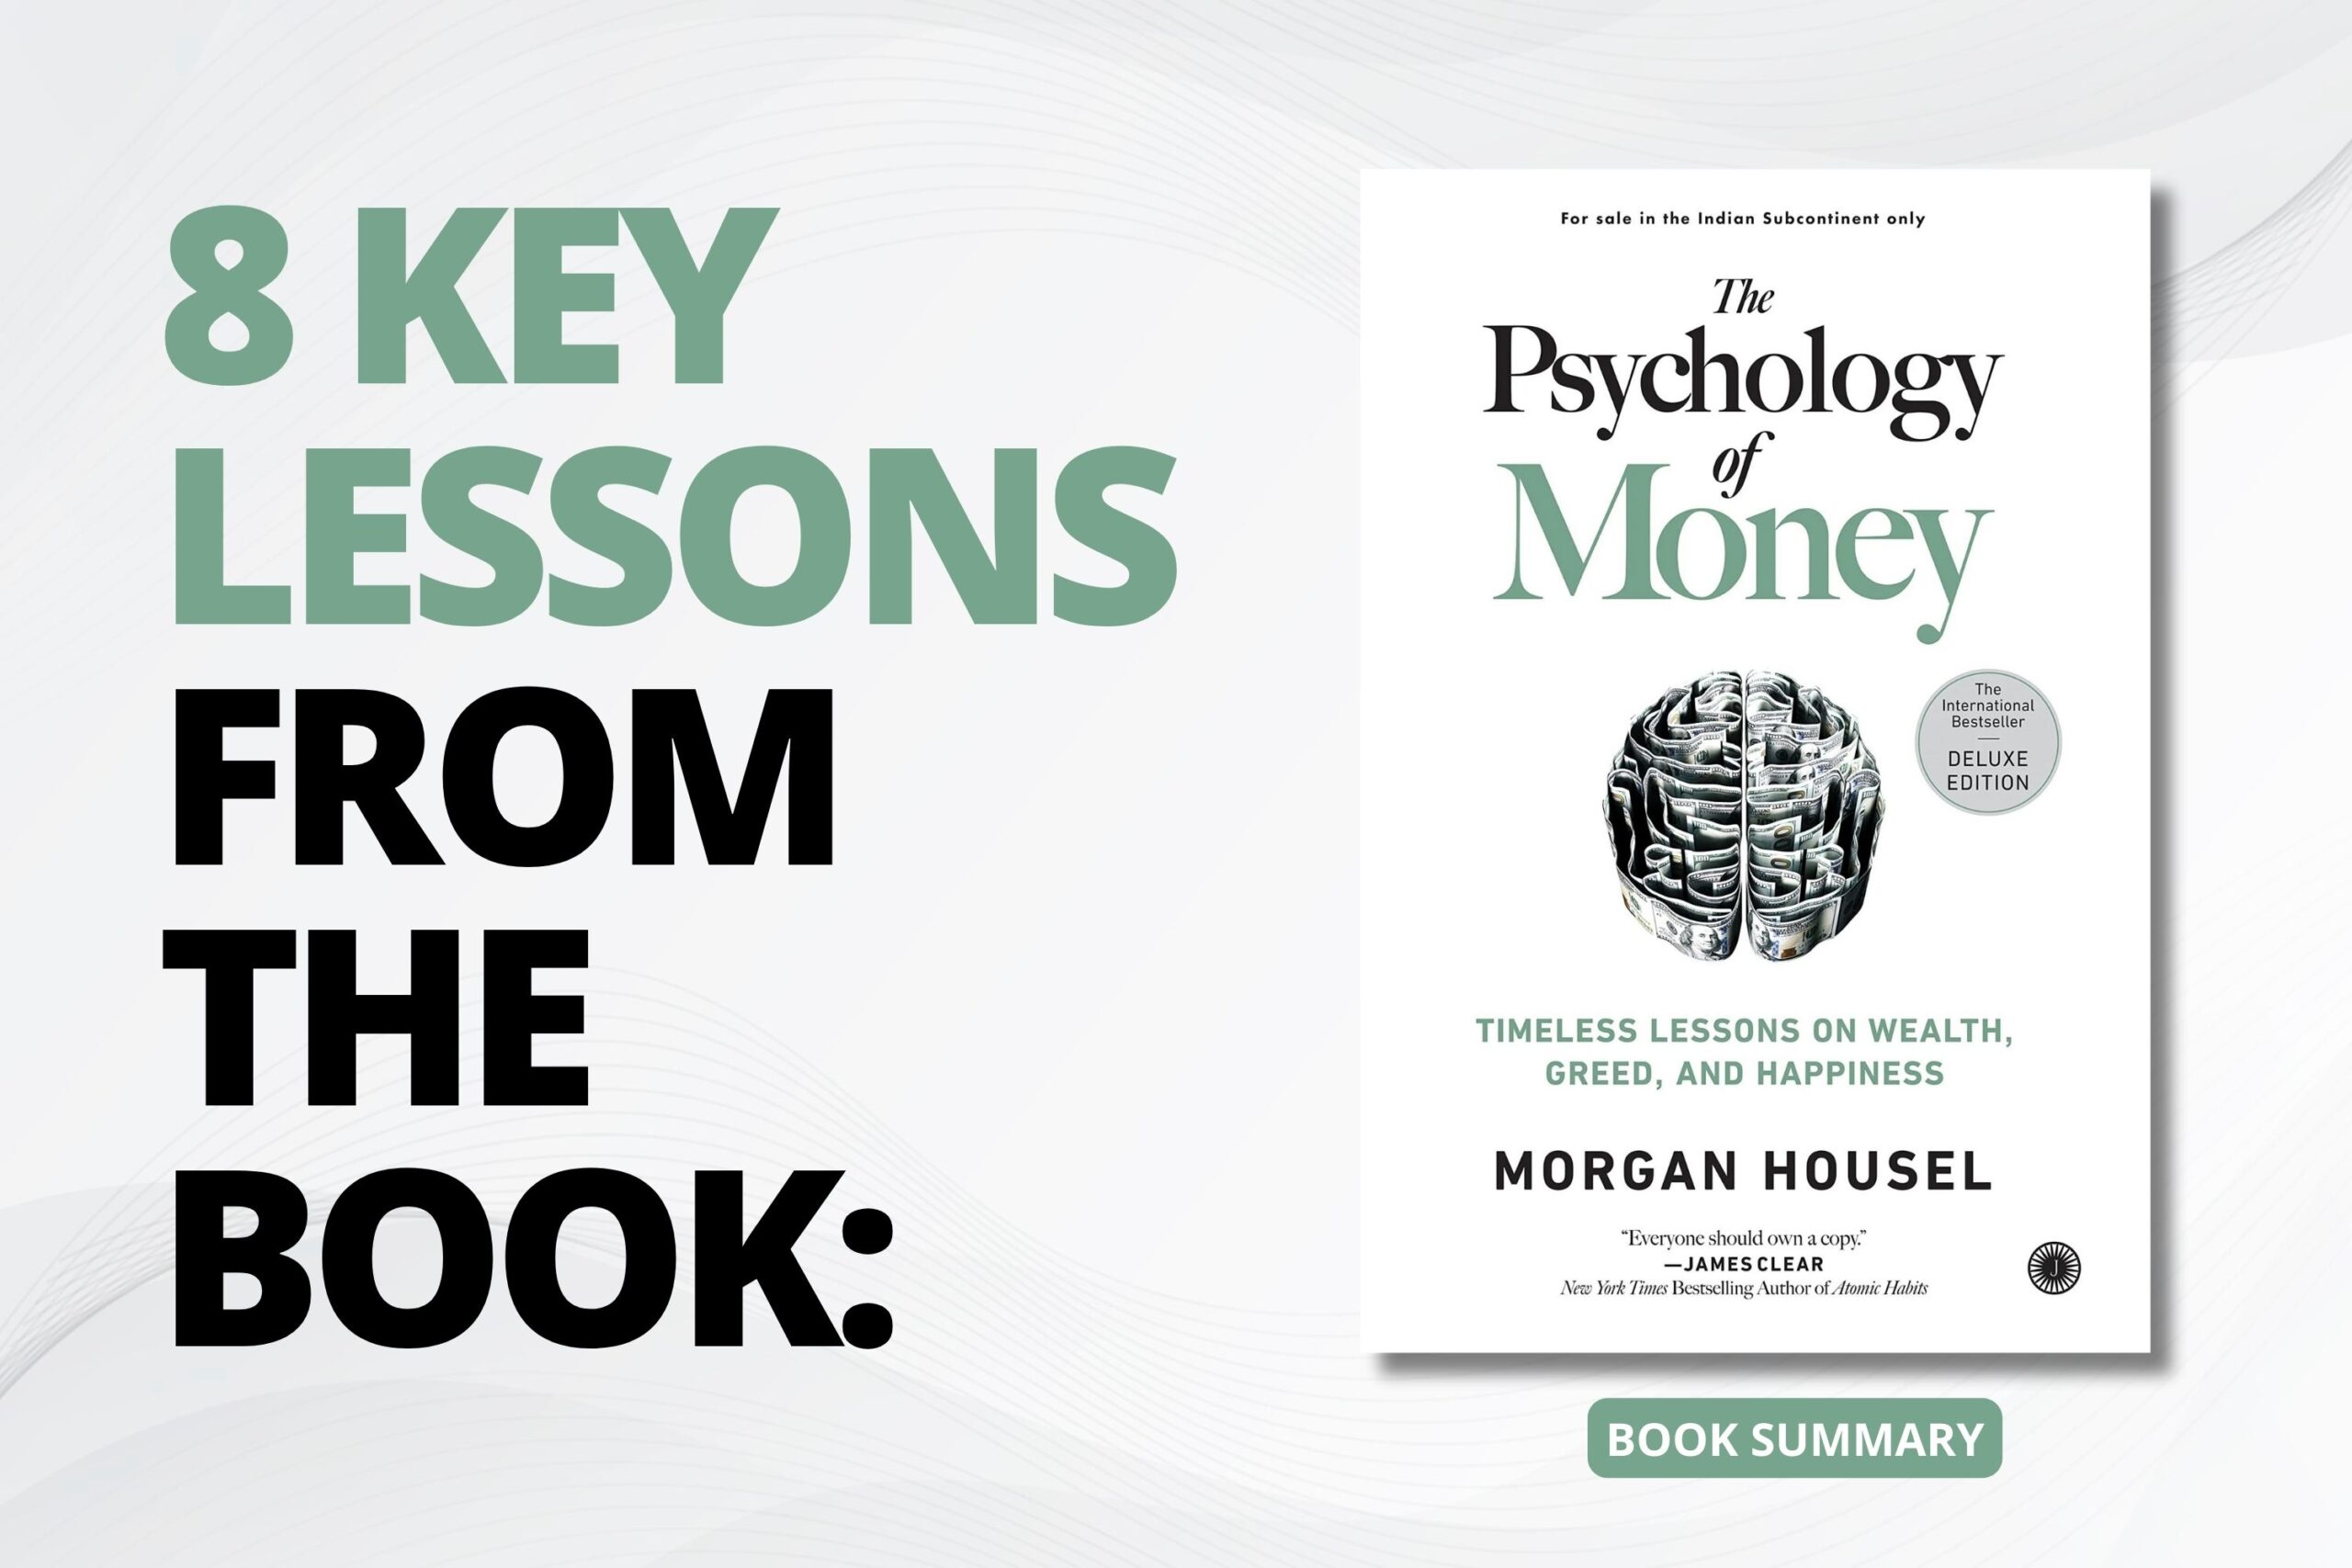 8 Key Lessons from The Psychology of Money: Book Summary